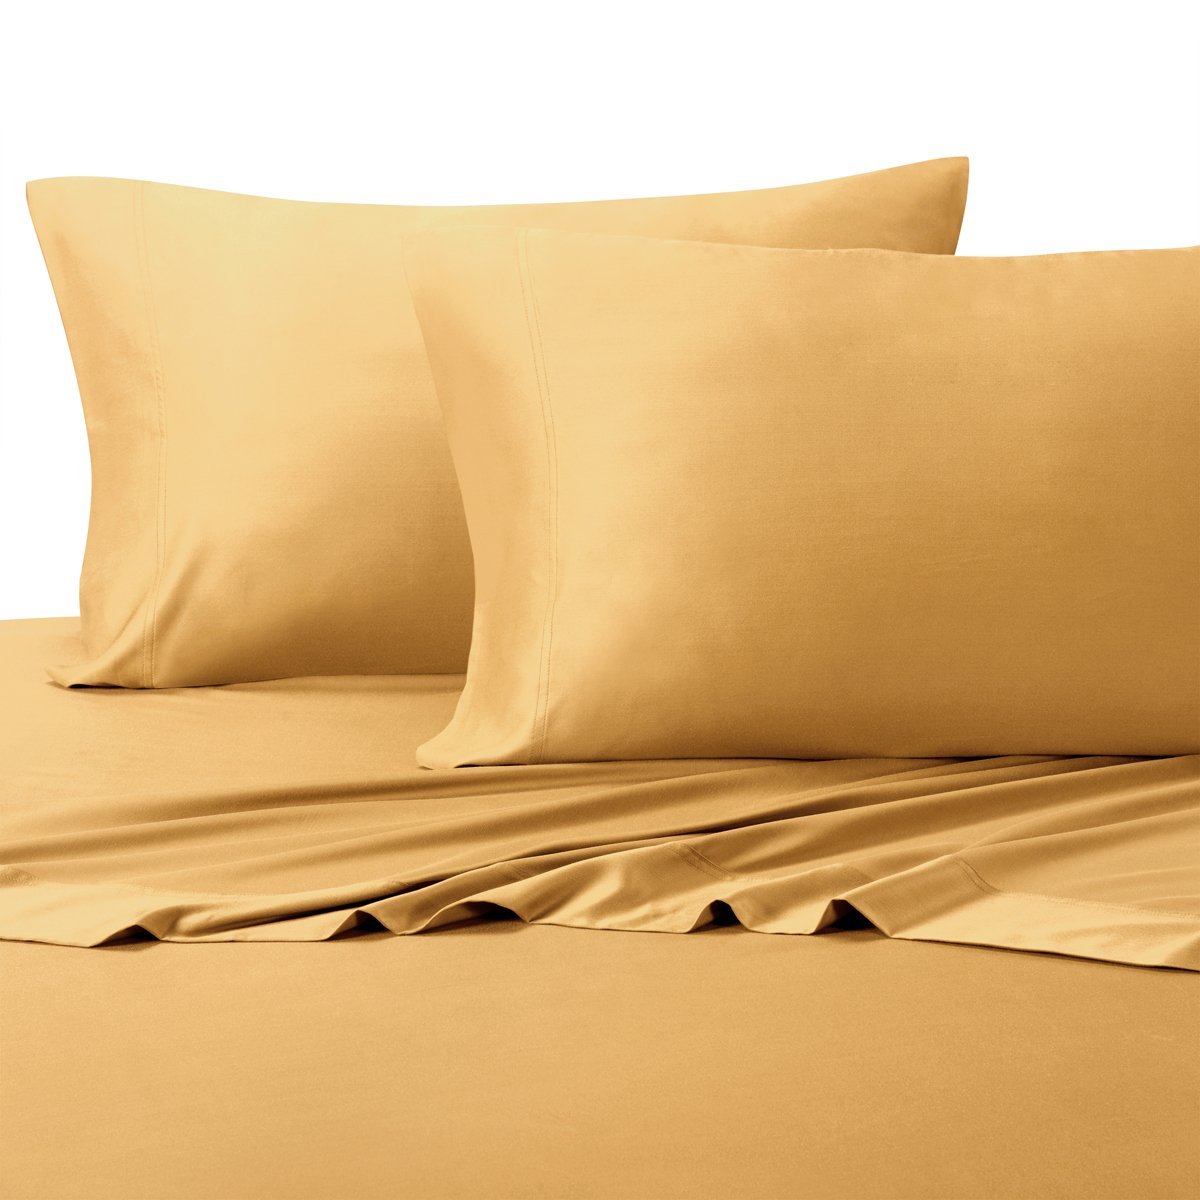 Buy 1000TC Sheet Sets Egyptian Cotton at egyptianhomelinens.com deep pocket king fitted sheet, king deep pocket bed sheets, twin xl fitted sheets for adjustable bed, cotton fitted sheet king.